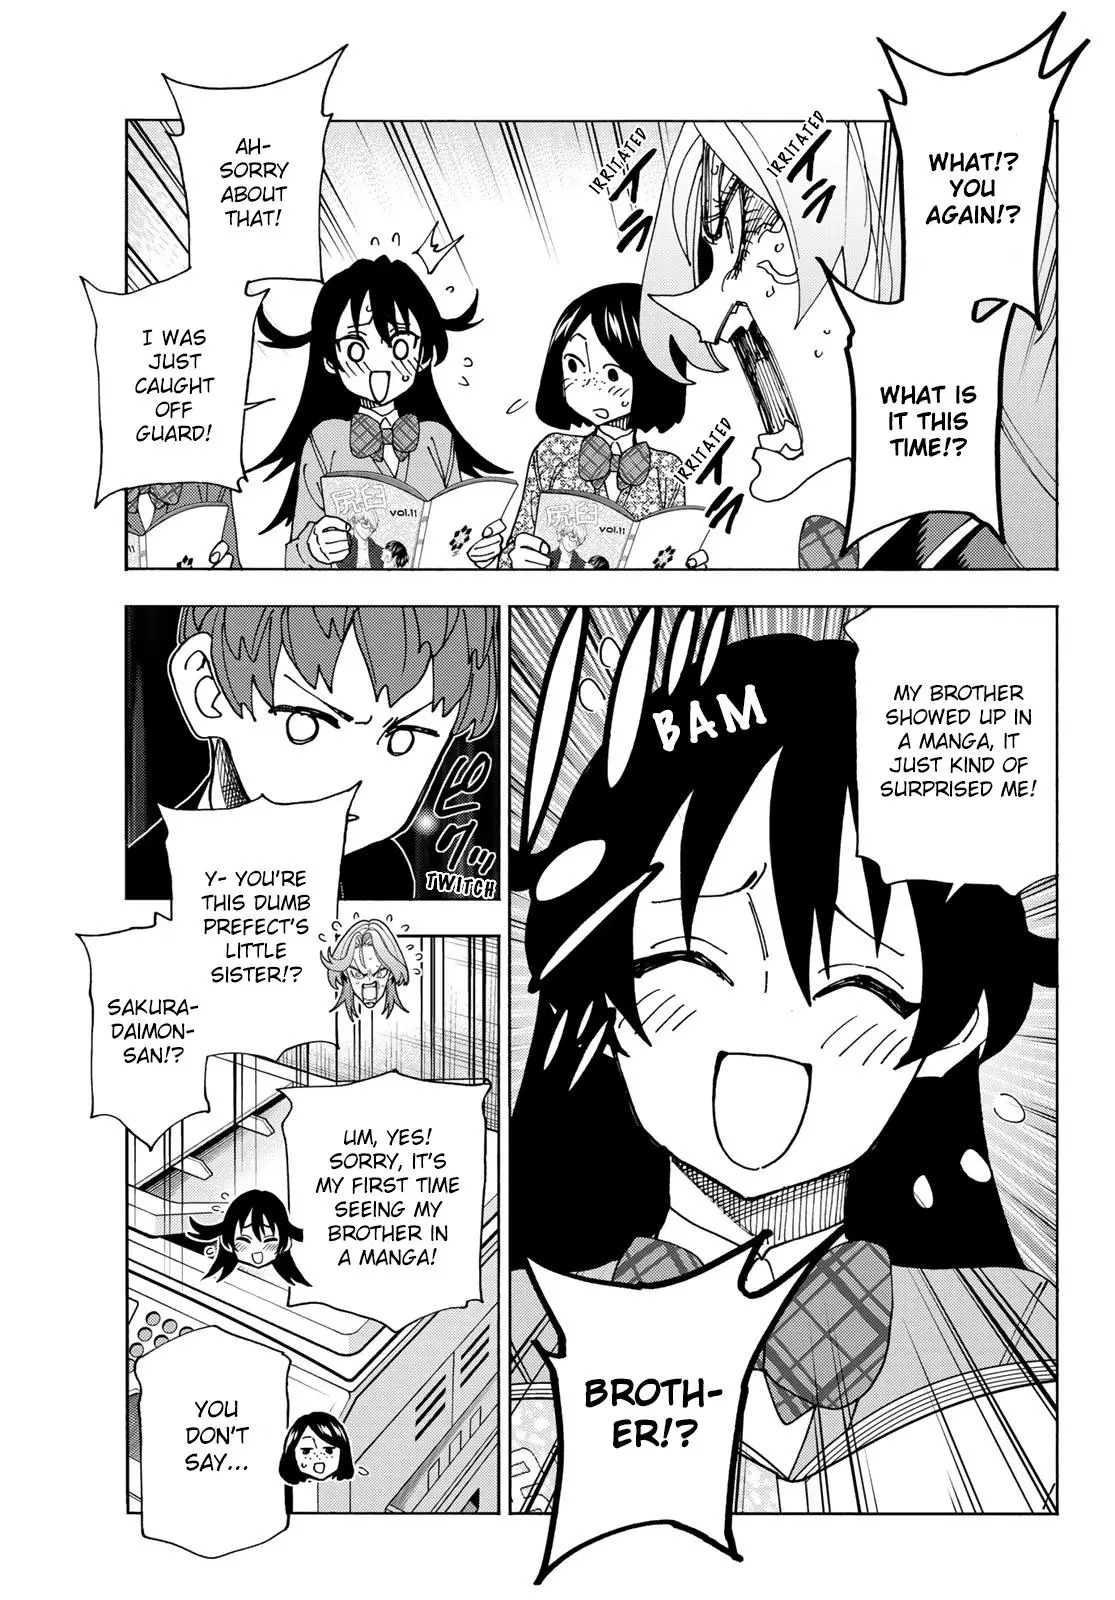 The Story Between A Dumb Prefect And A High School Girl With An Inappropriate Skirt Length - 63 page 9-e5f2ed5d